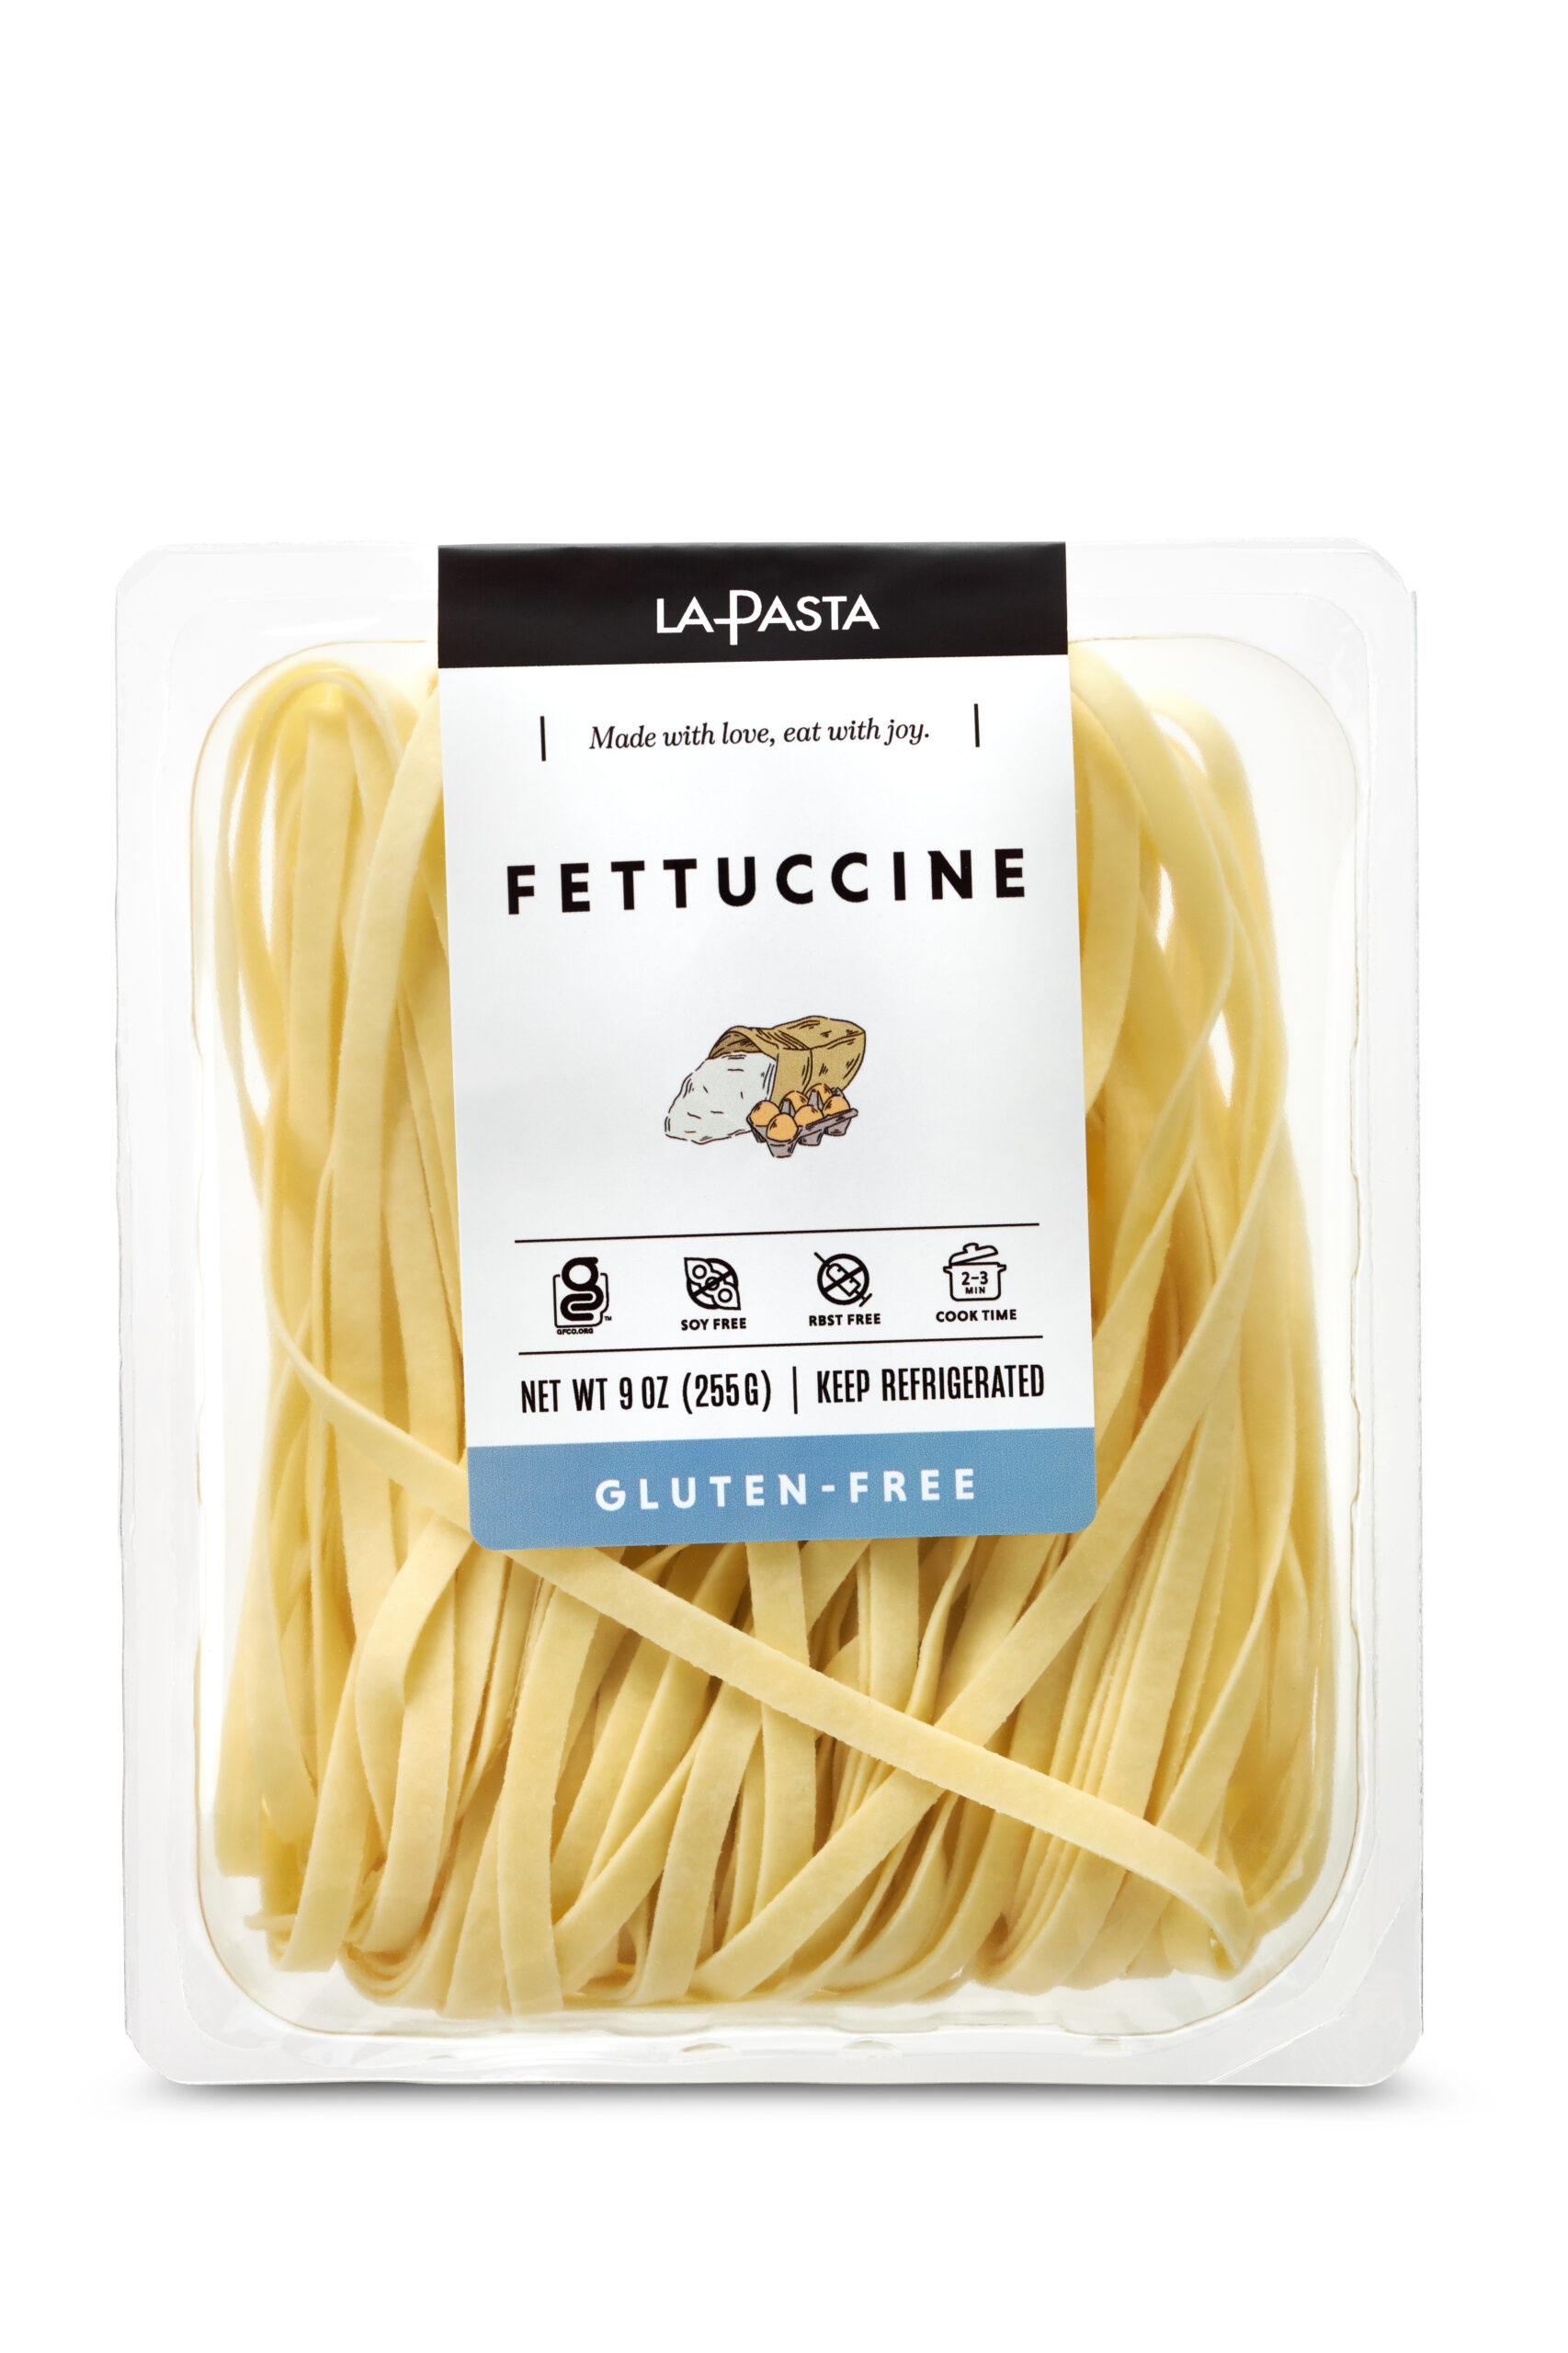 A package of fettuccine pasta with a label.